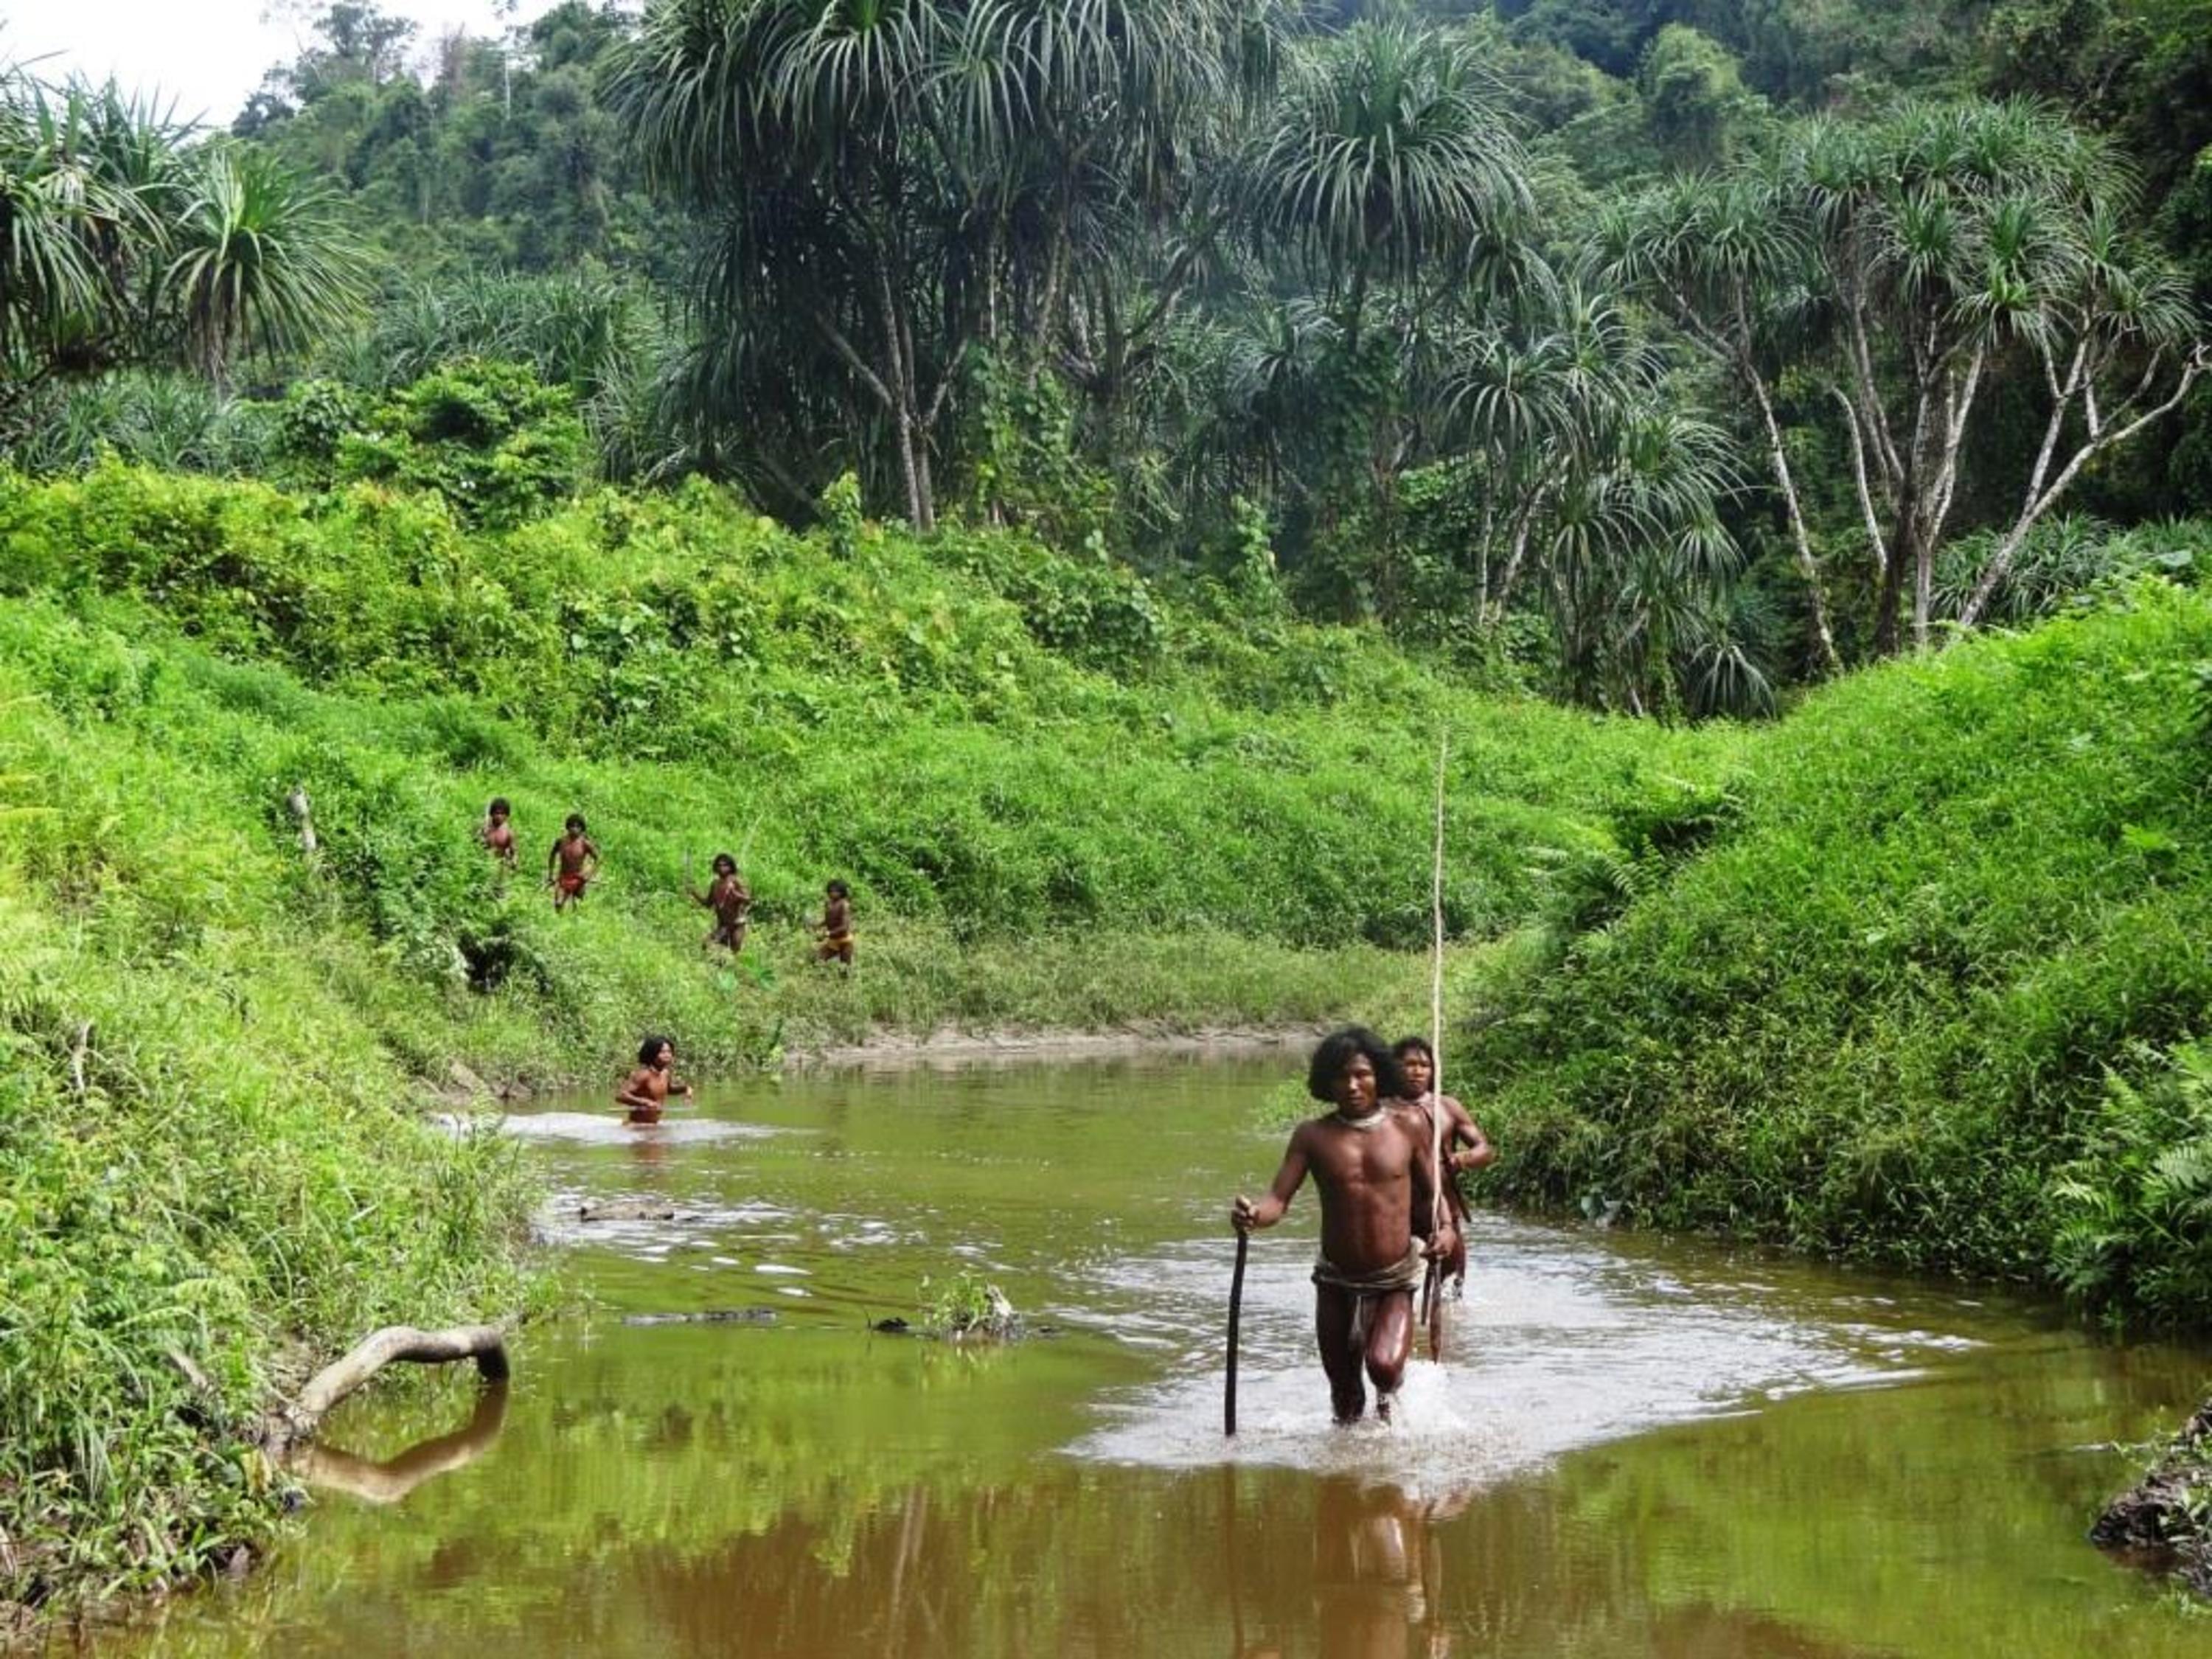 SHOMPEN: Uncontacted tribe in India faces genocide in the name of ‘mega-development’.